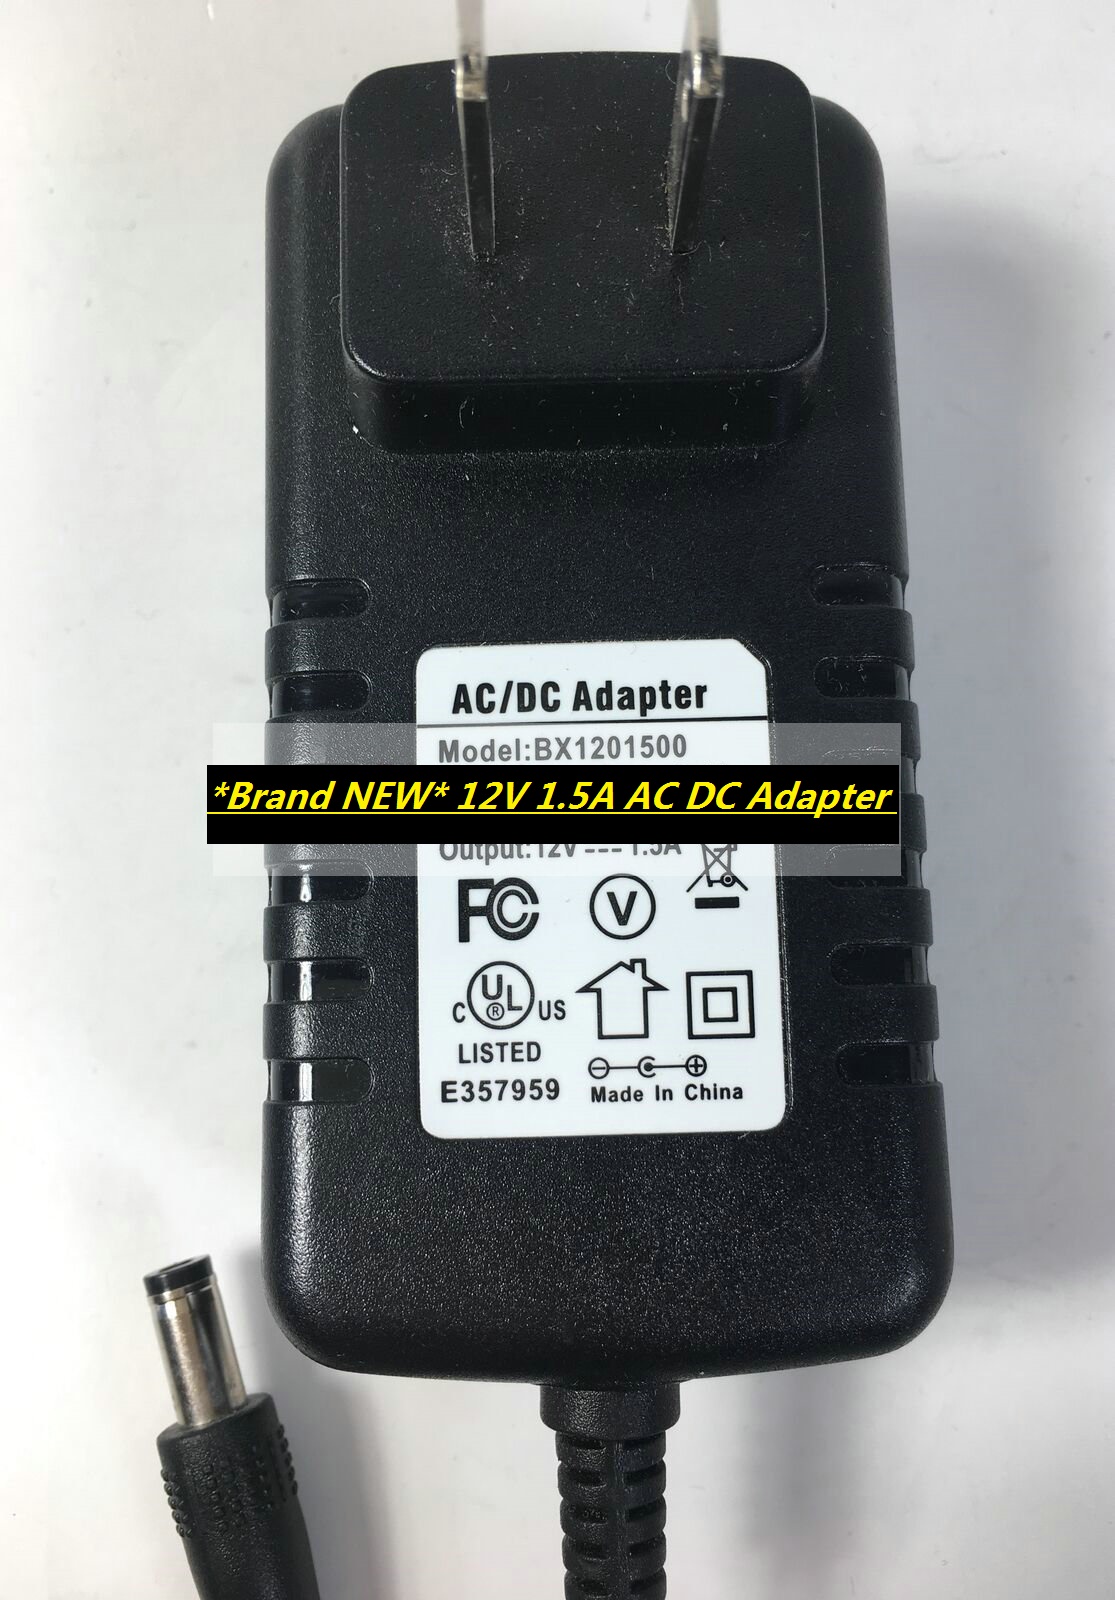 *Brand NEW* BX1201500 12V 1.5A AC DC Adapter Power Supply